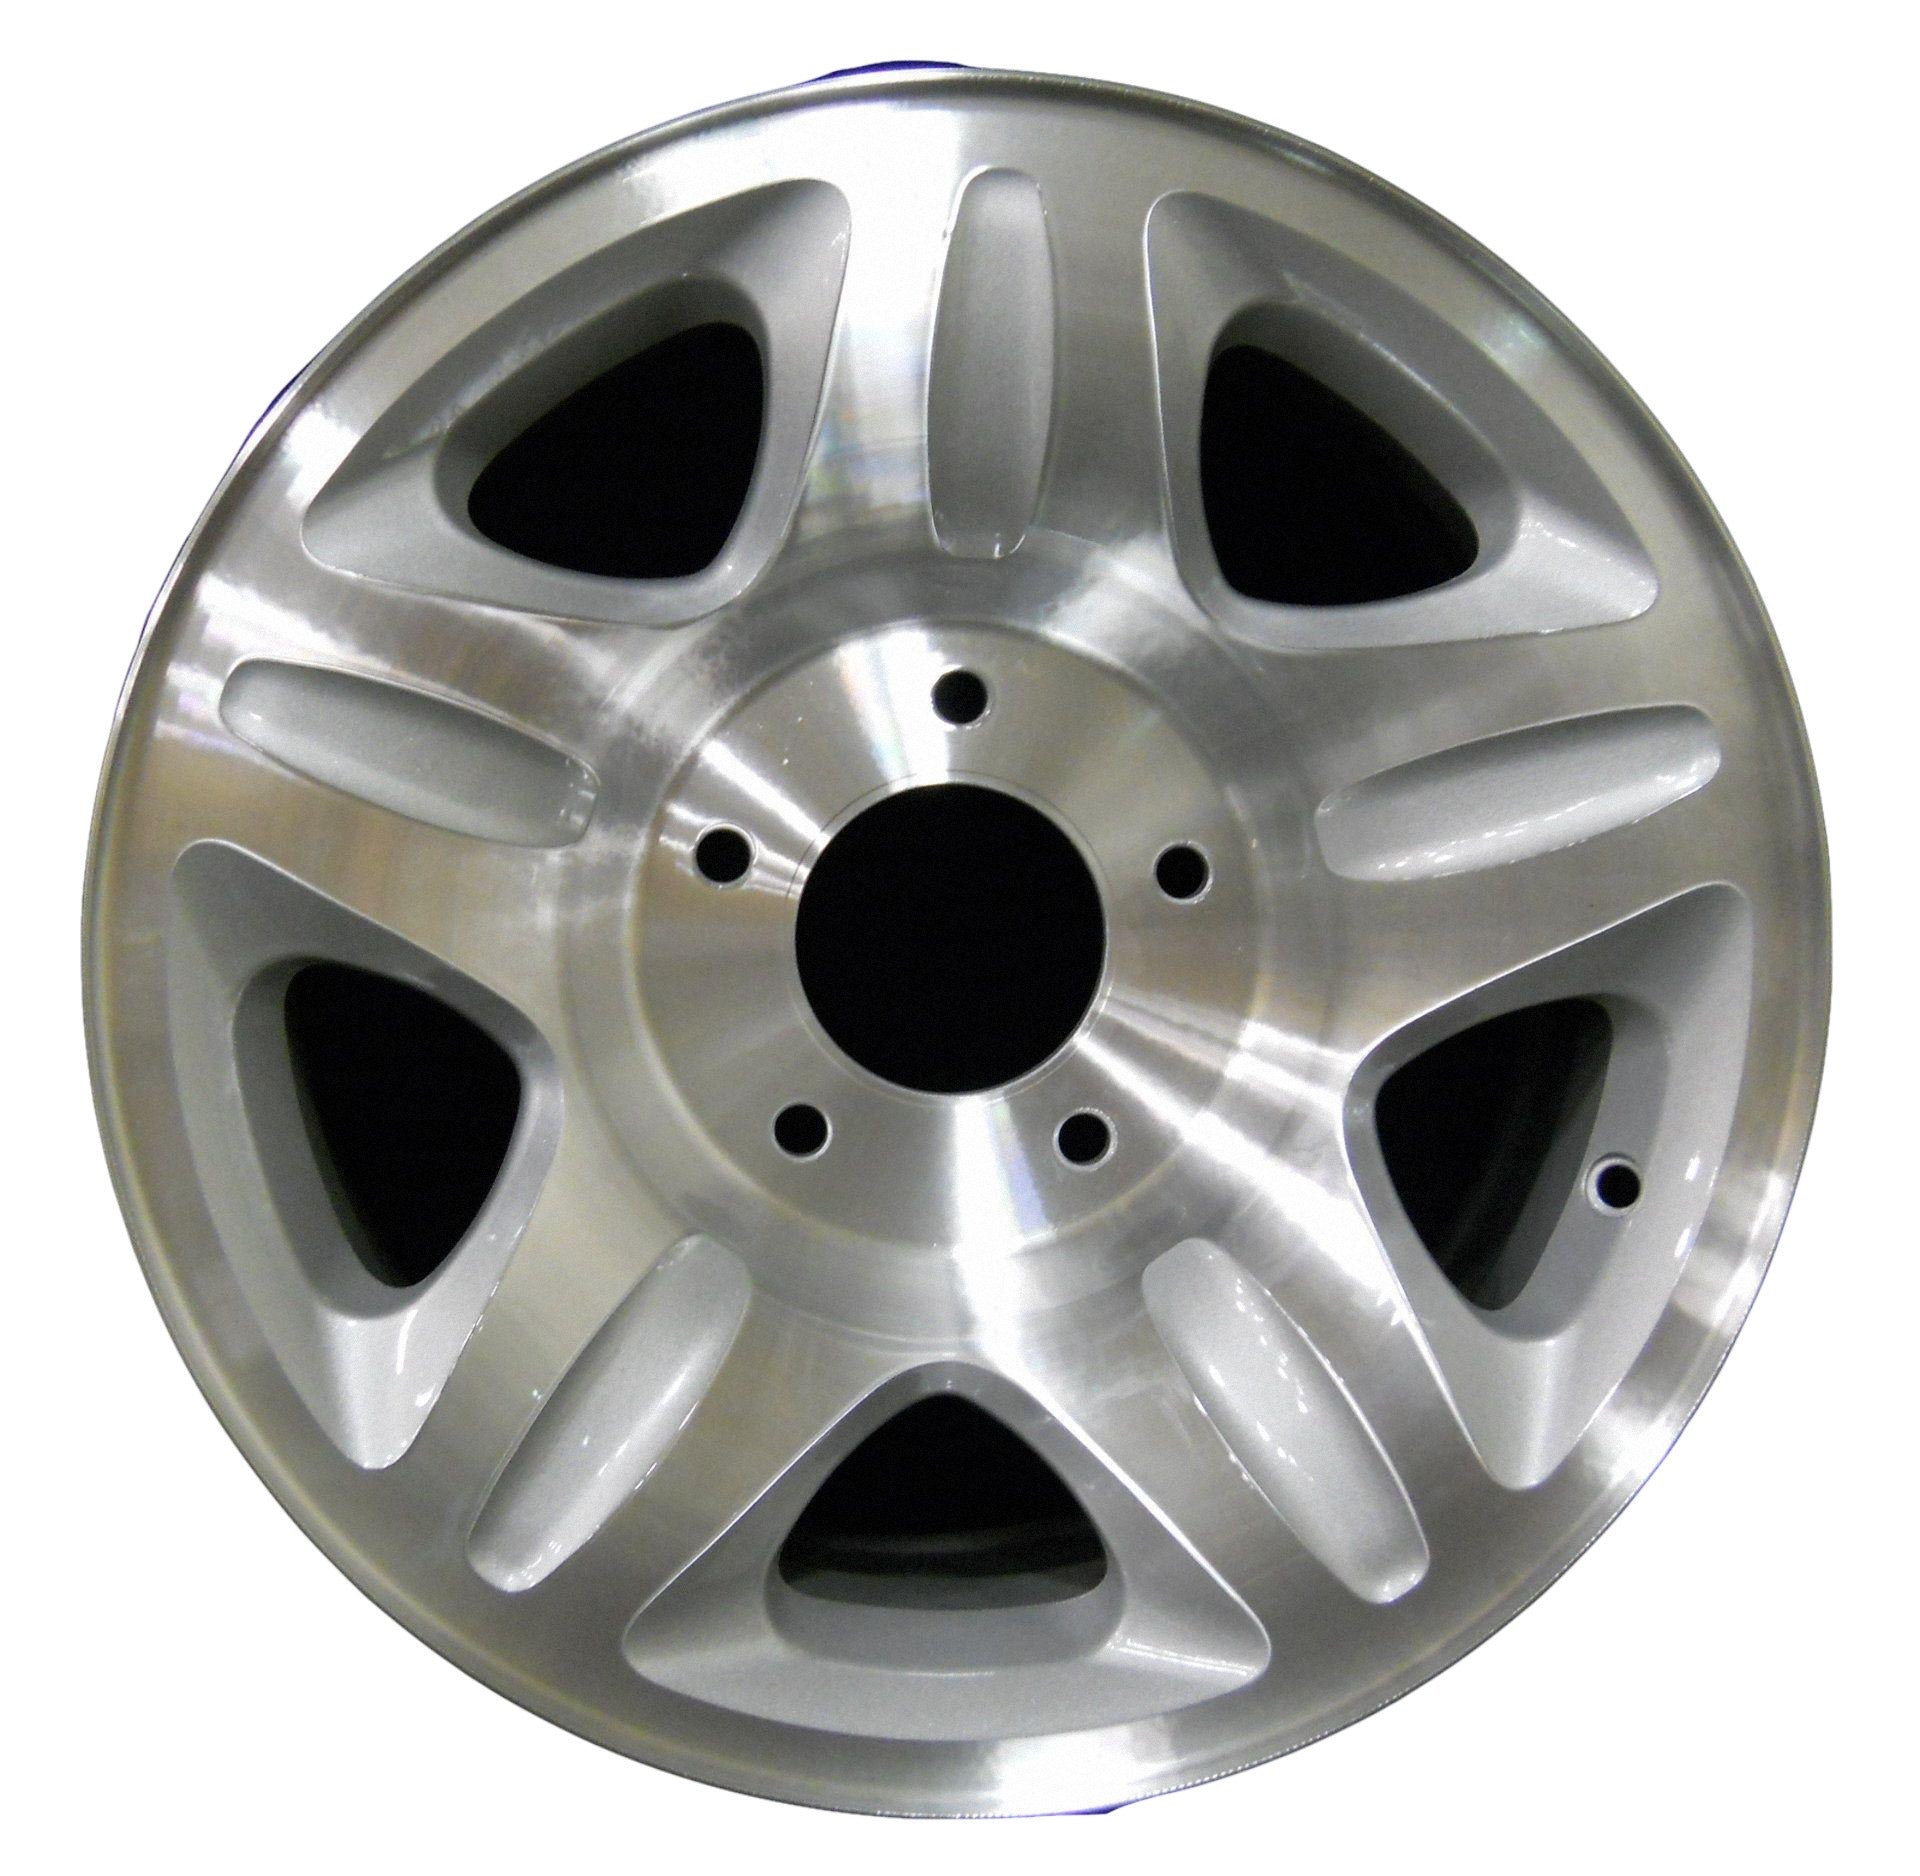 Ford Expedition  1997, 1998, 1999 Factory OEM Car Wheel Size 16x7 Alloy WAO.3255B.PS02.MA